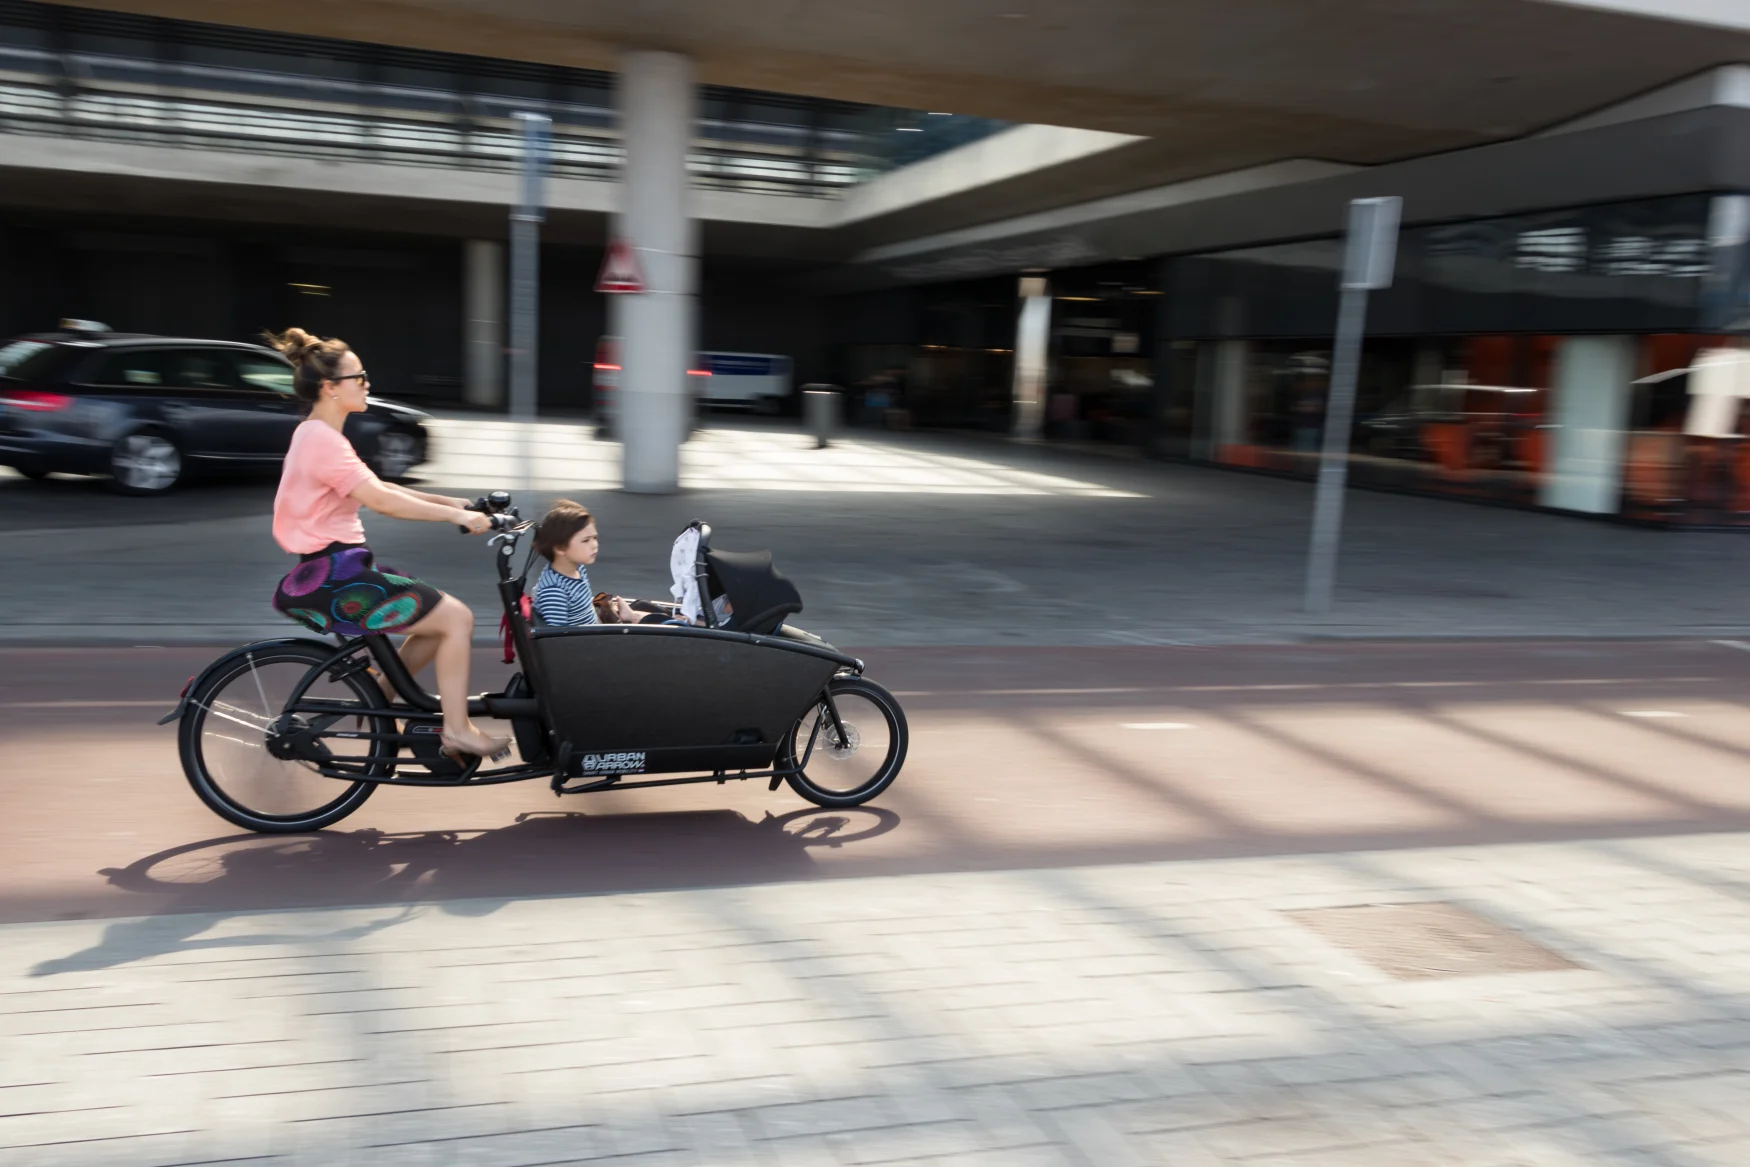 Amsterdam, Netherland - July 20th, 2018: A woman cycling with kids on a cargo bike at the Amsterdam Central Train Station, Netherlands.